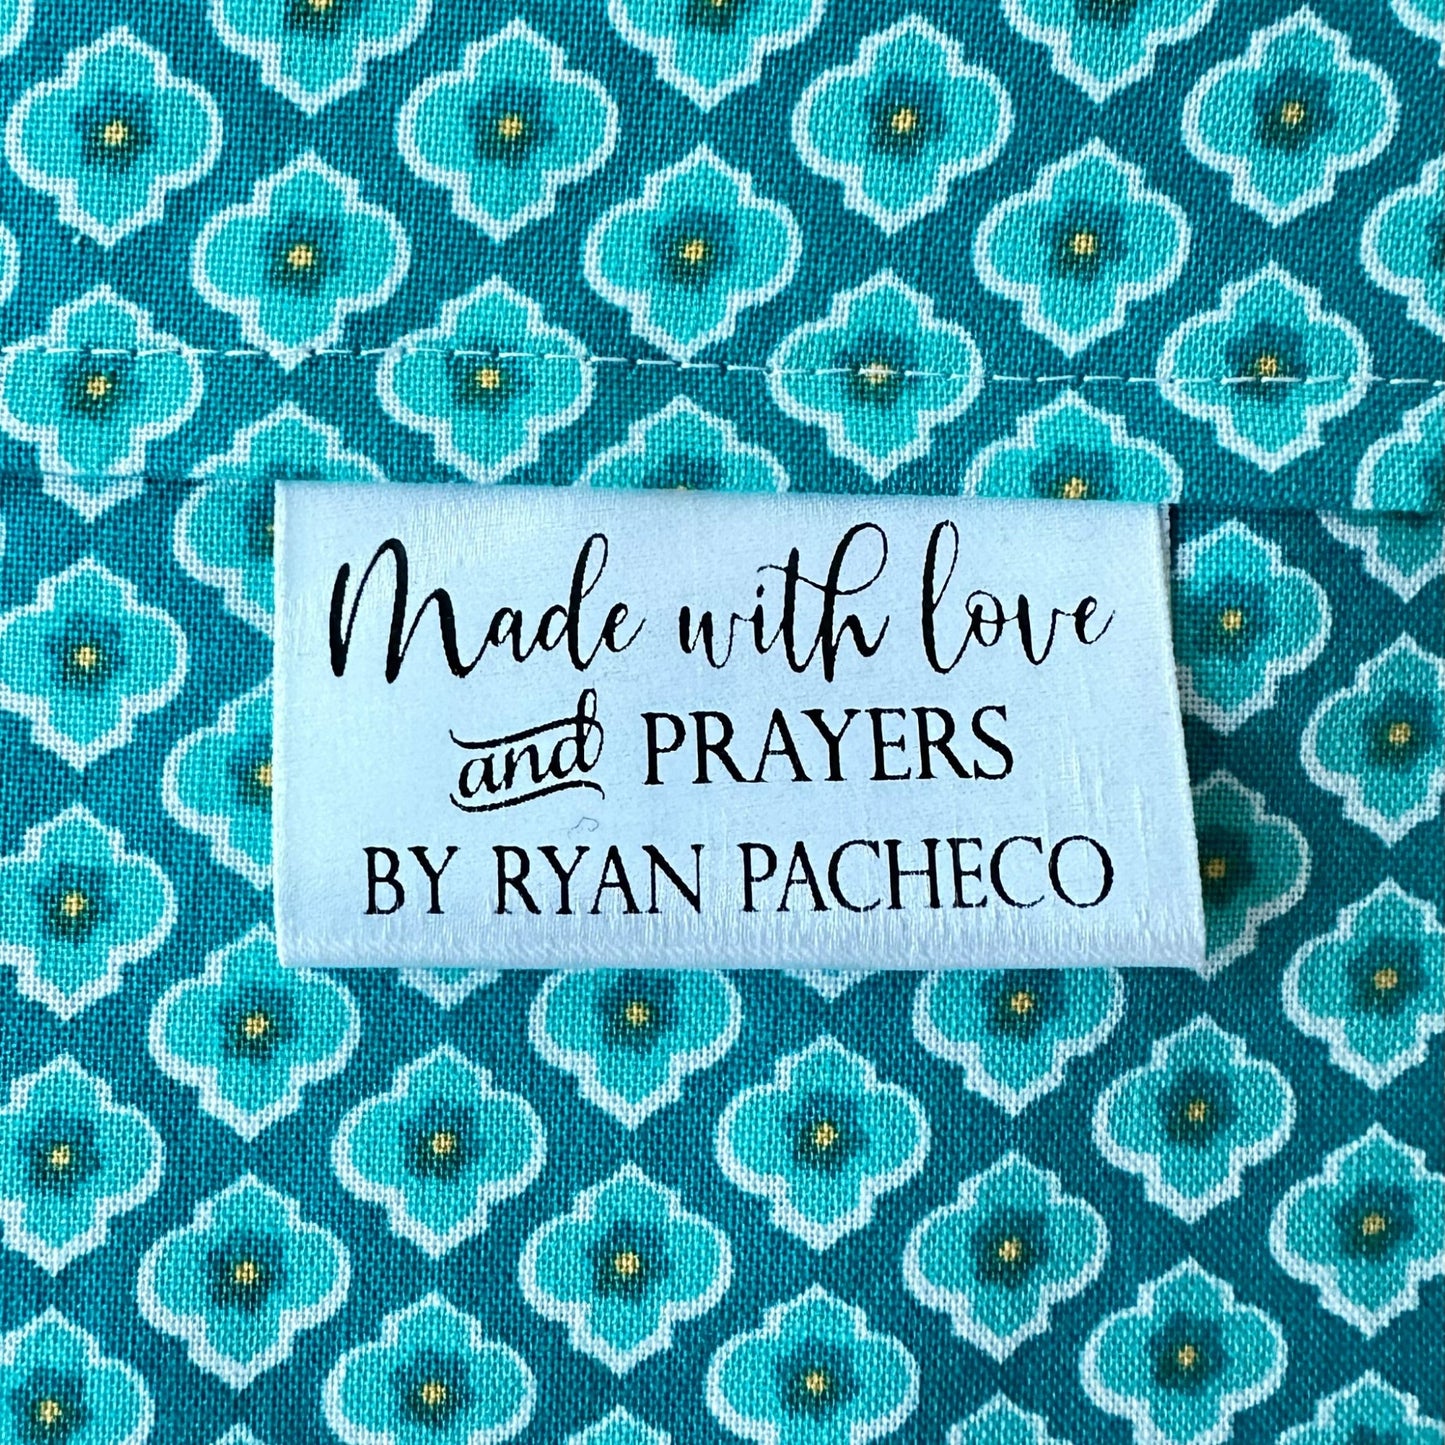 Made with Love and Prayer. Inspirational satin labels for sewing and quilting - Jammin Threads